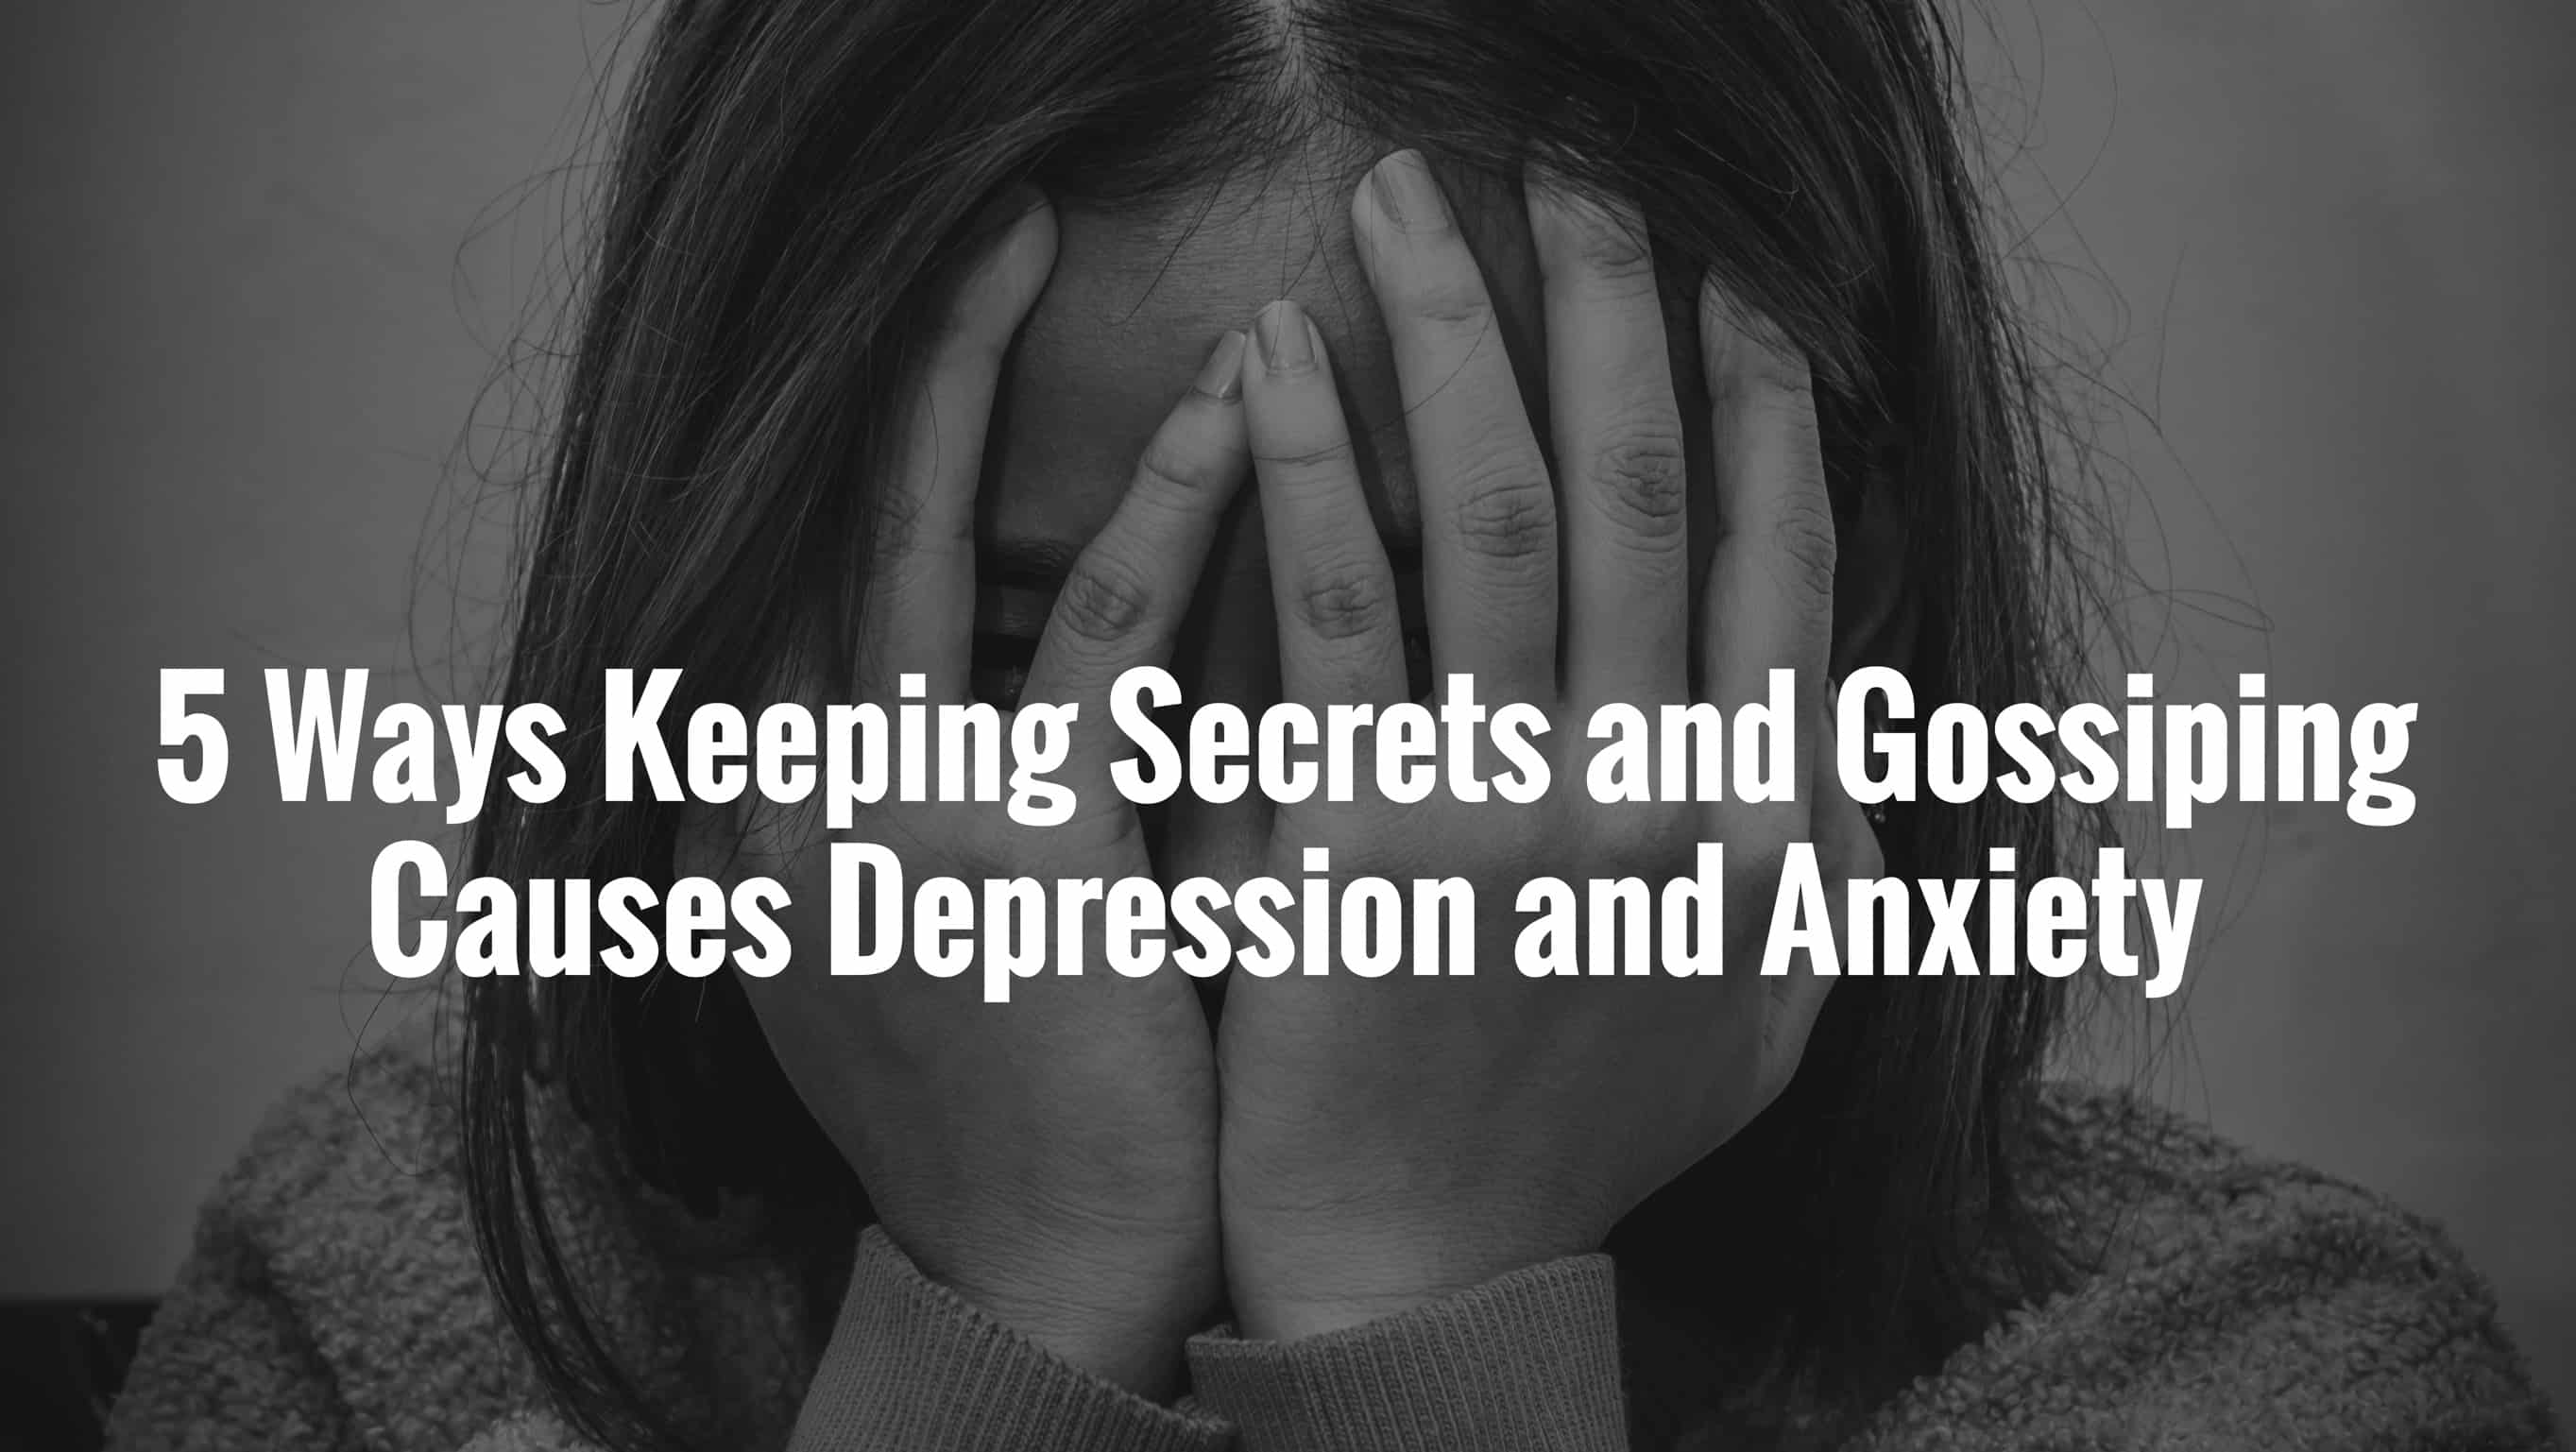 5 Ways Keeping Secrets and Gossiping Causes Depression and Anxiety